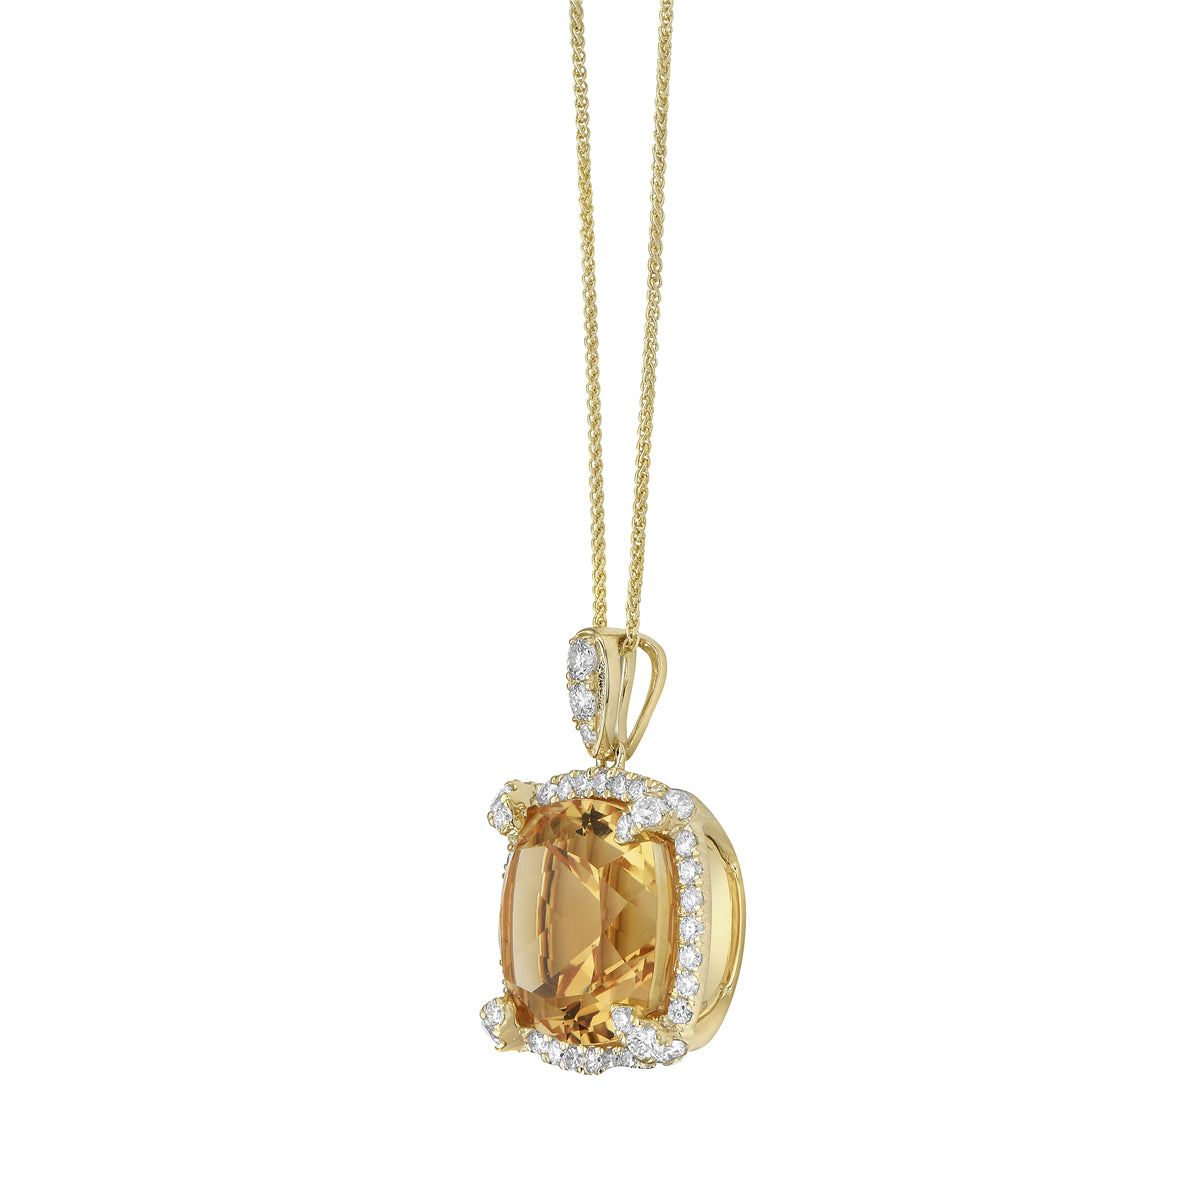 Pendant 14KY/3.5G 1CIT-10.34CT 43RD-0.82CT (14mm) Citrin